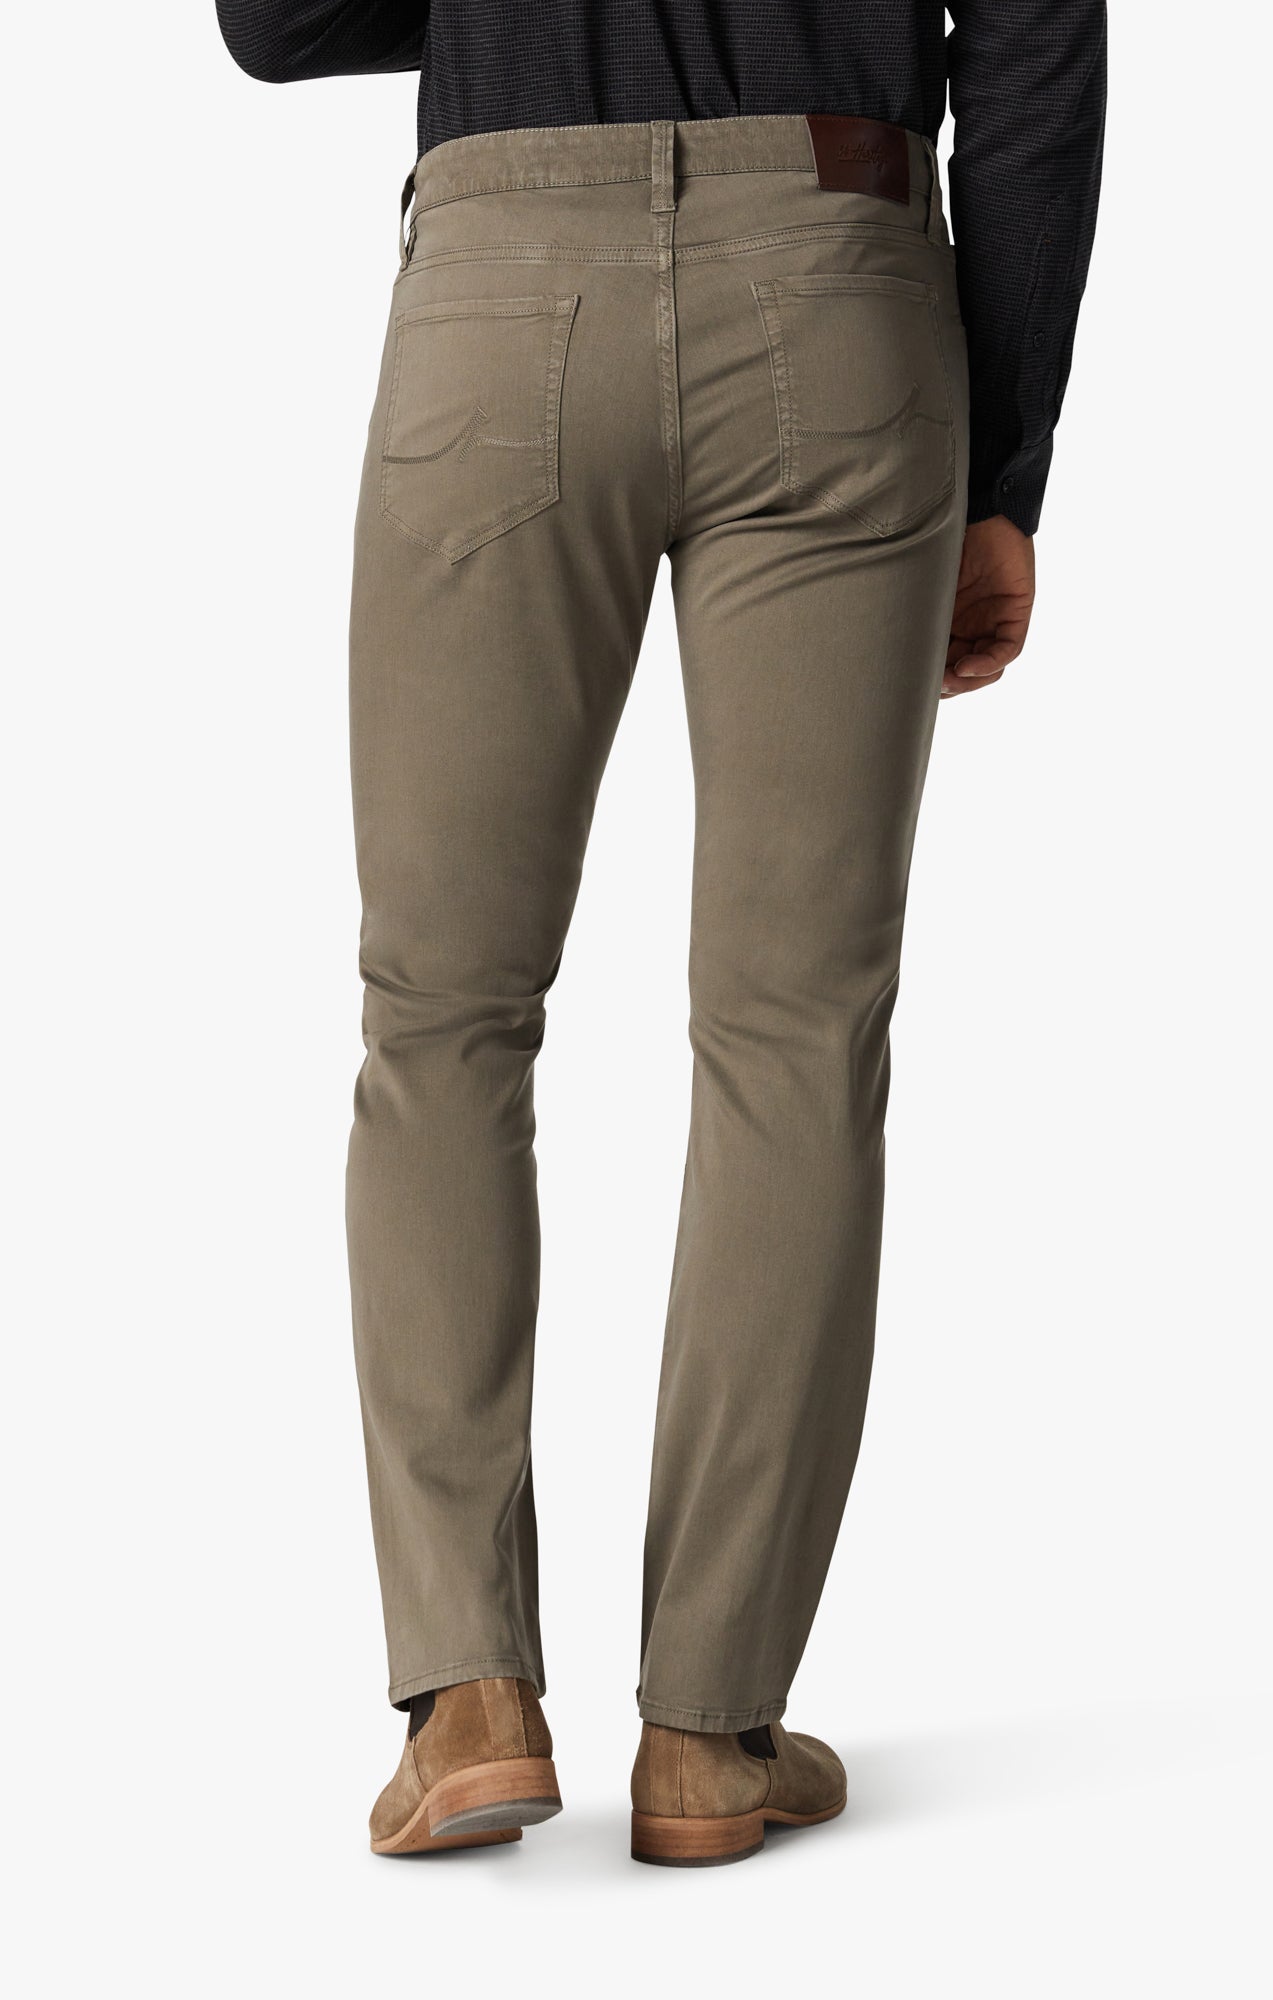 Courage Straight Leg Pants in Canteen Twill Image 5